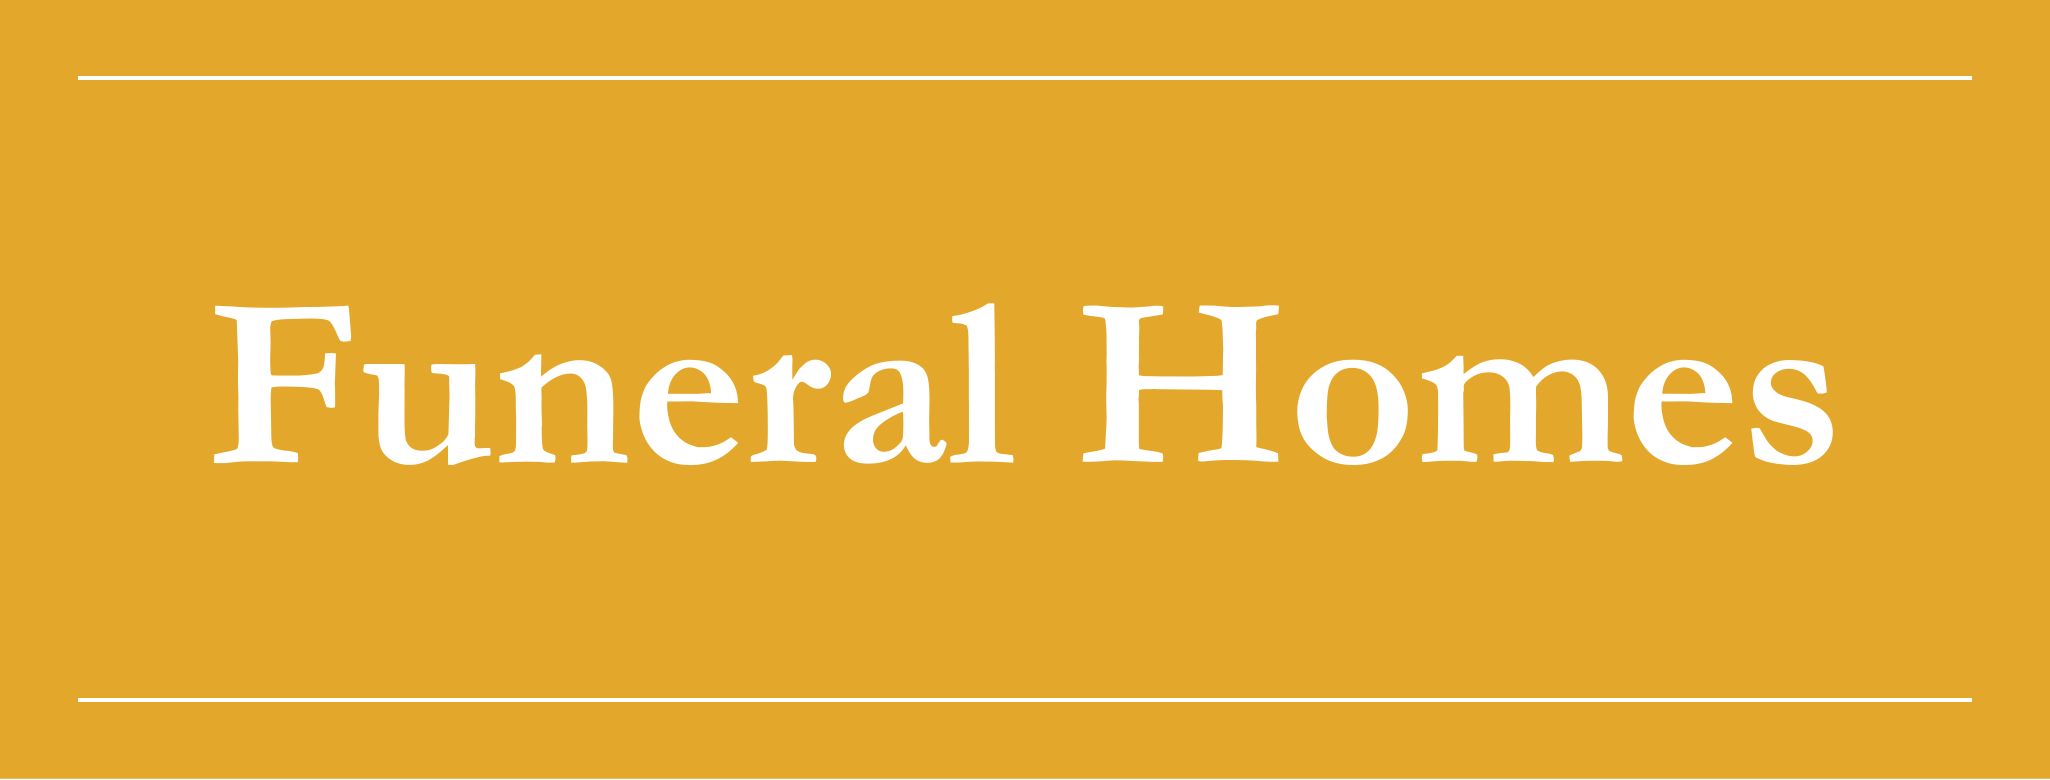 Funeral Homes Email